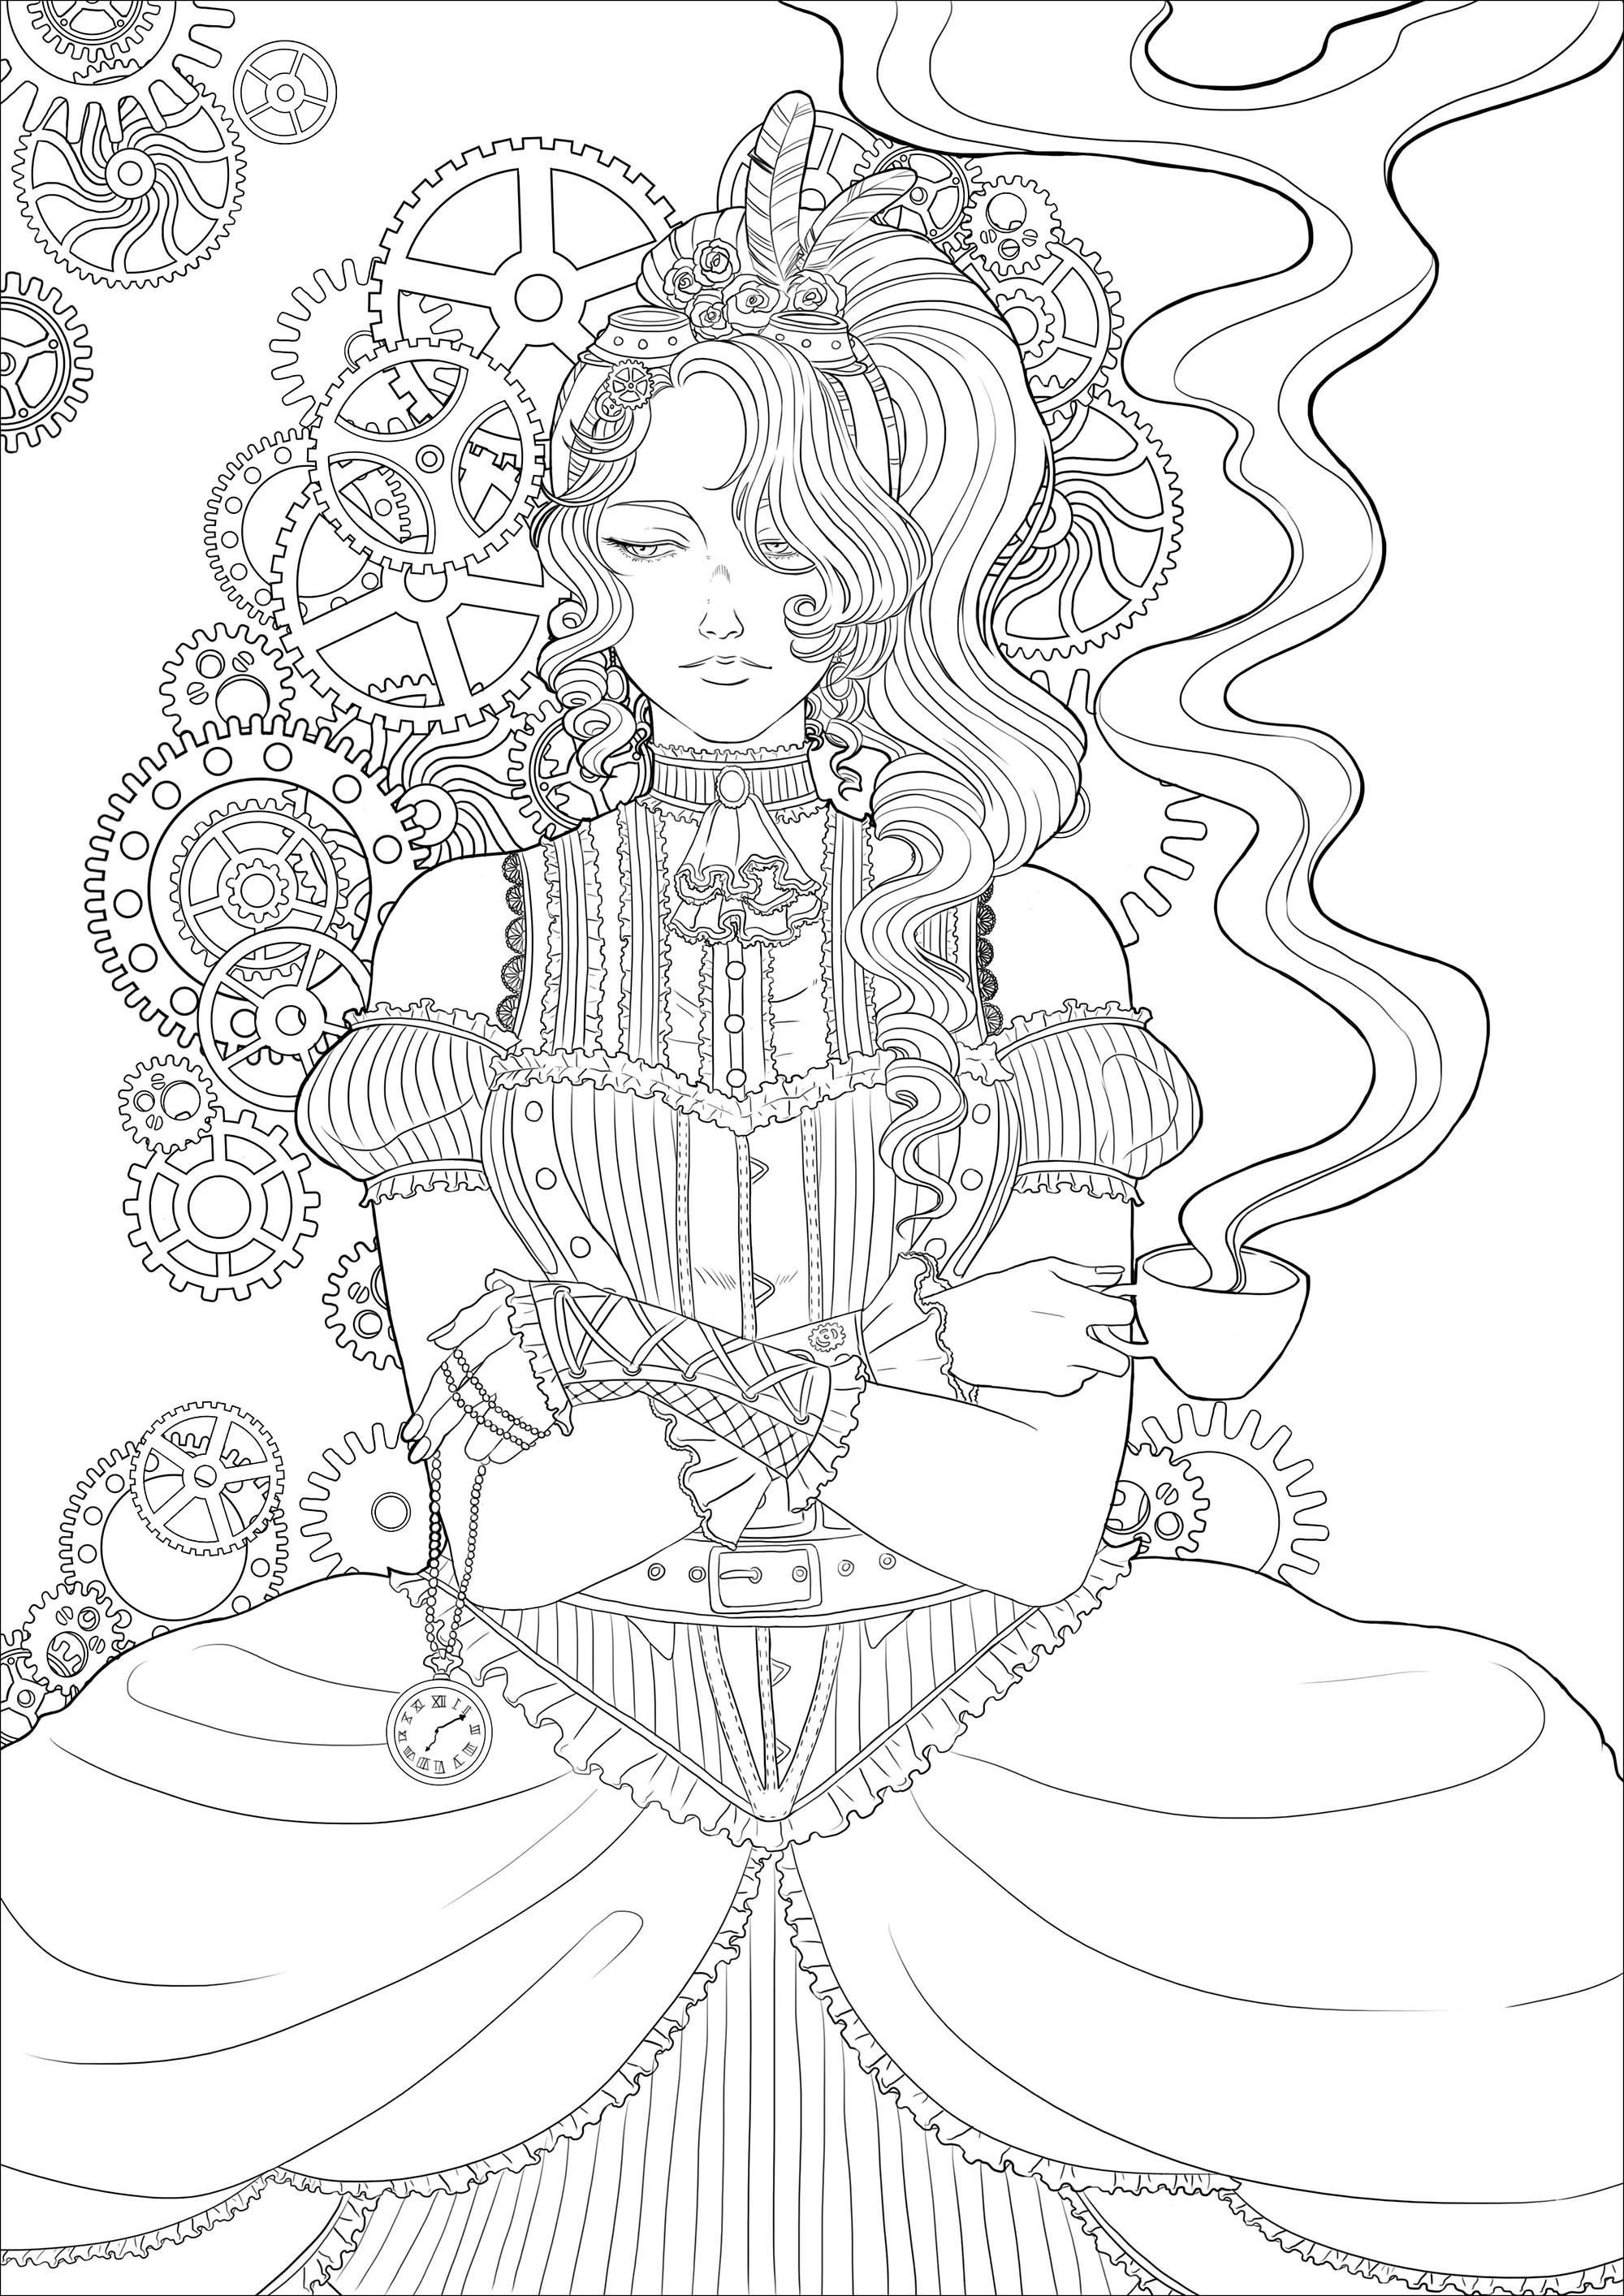 Coloring page of a melancholy young woman with a cup of tea, all in a Victorian environment and mechanisms, Artist : Lestat Hallward Holmes